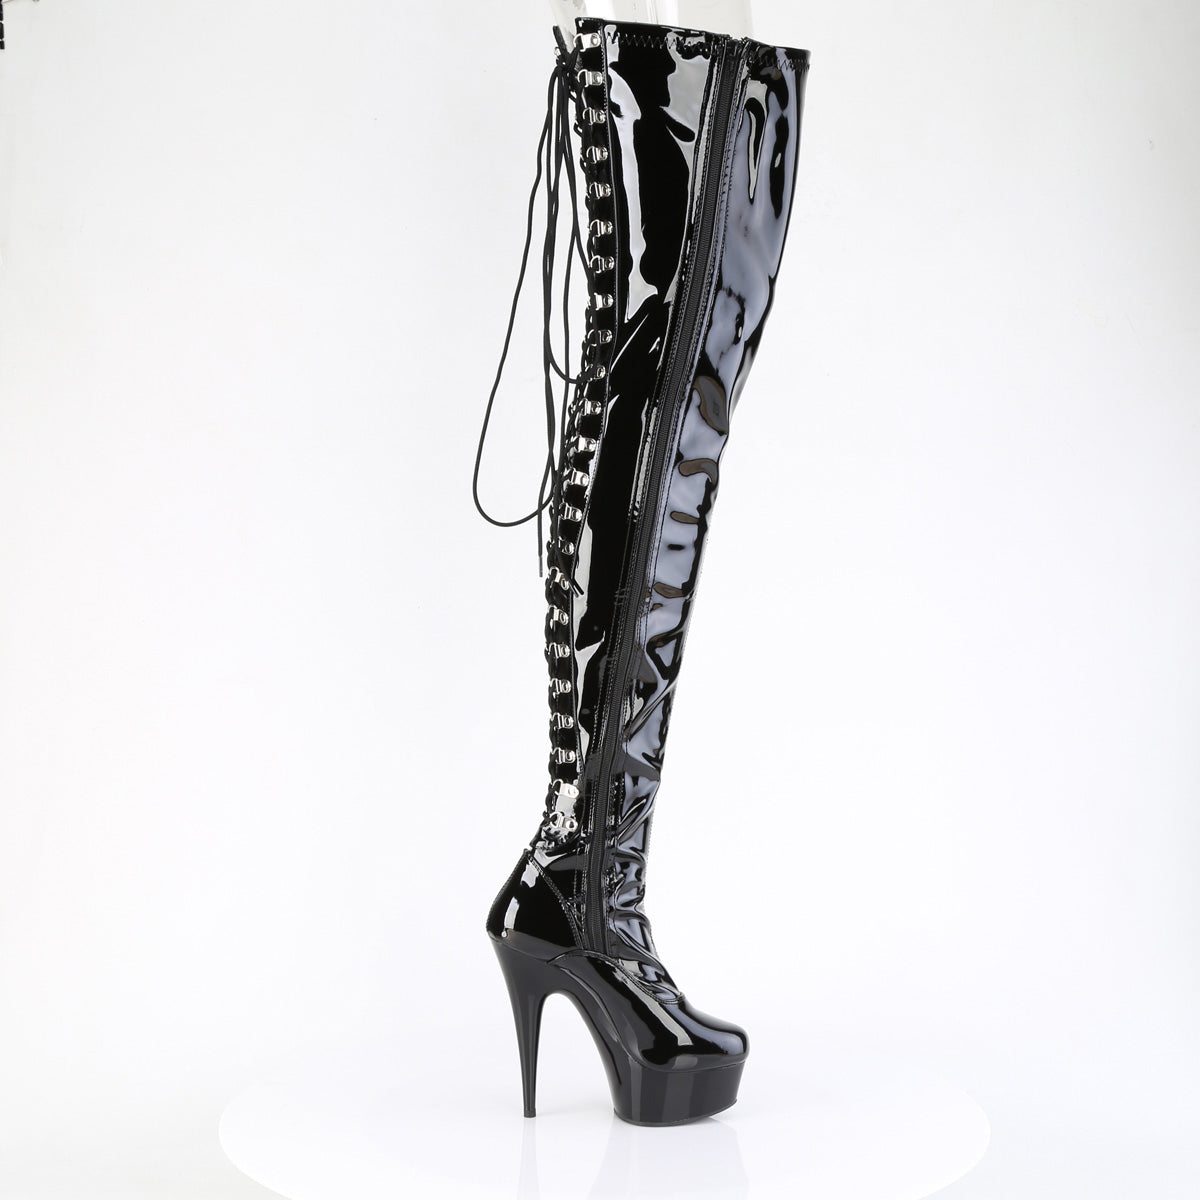 DELIGHT-4063 Pleaser Pole Dancing Thigh High Boots